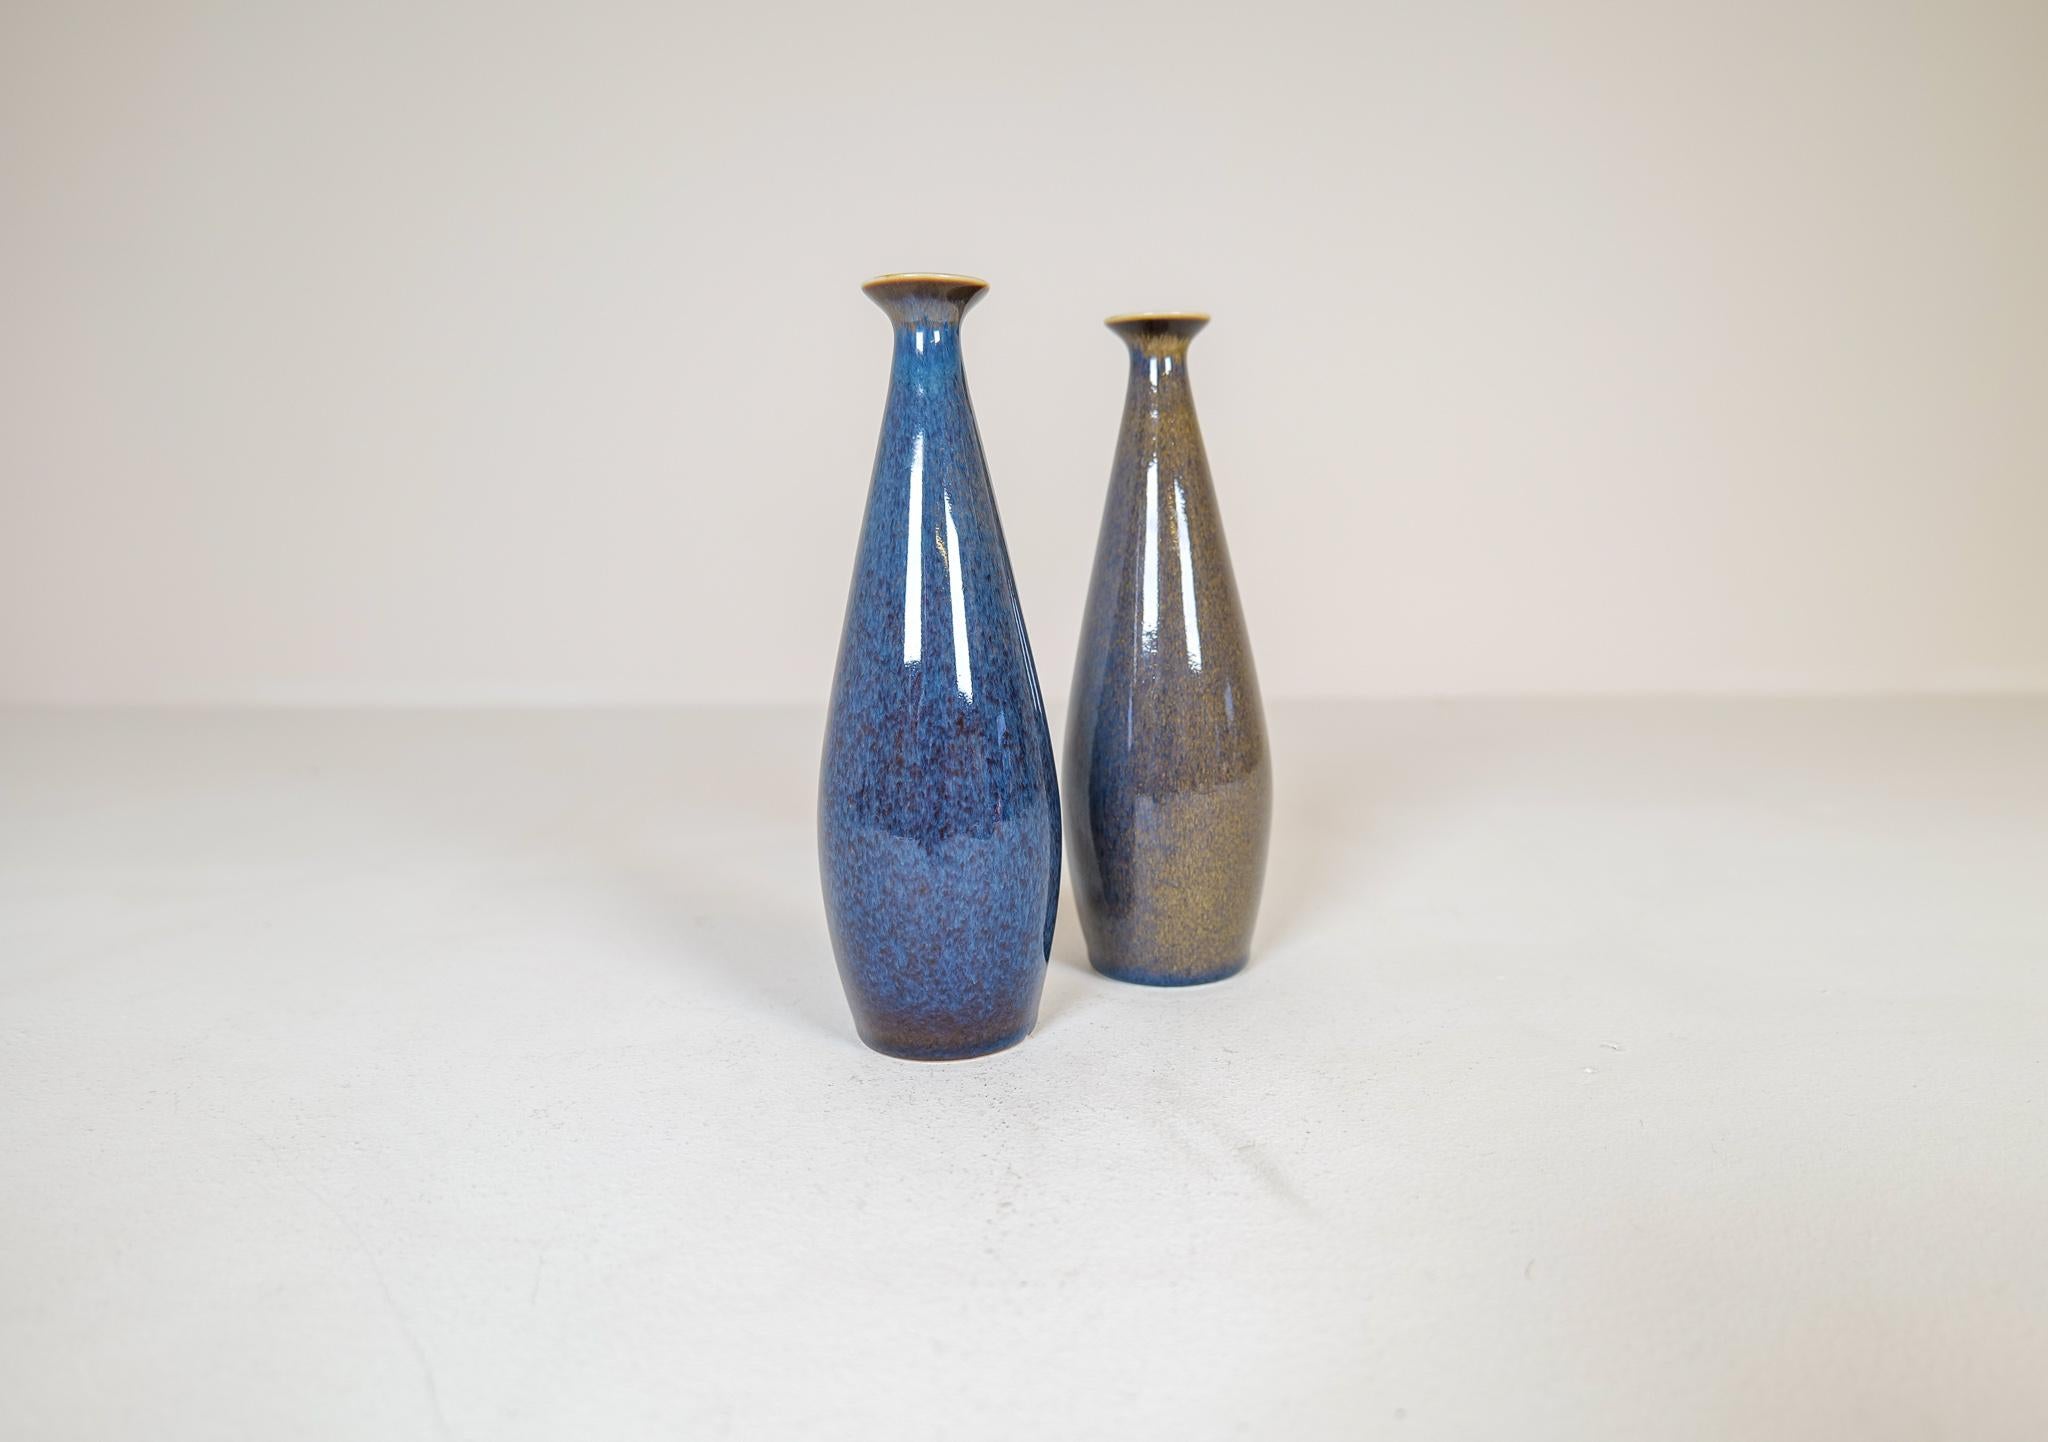 These vases from Rörstrand and maker/designer Carl Harry Stålhane, are a great example of midcentury modern quality and design made in Sweden during the 1950s and 1960s. The sculptural shape together with the amazing glaze this pair is a wonderful